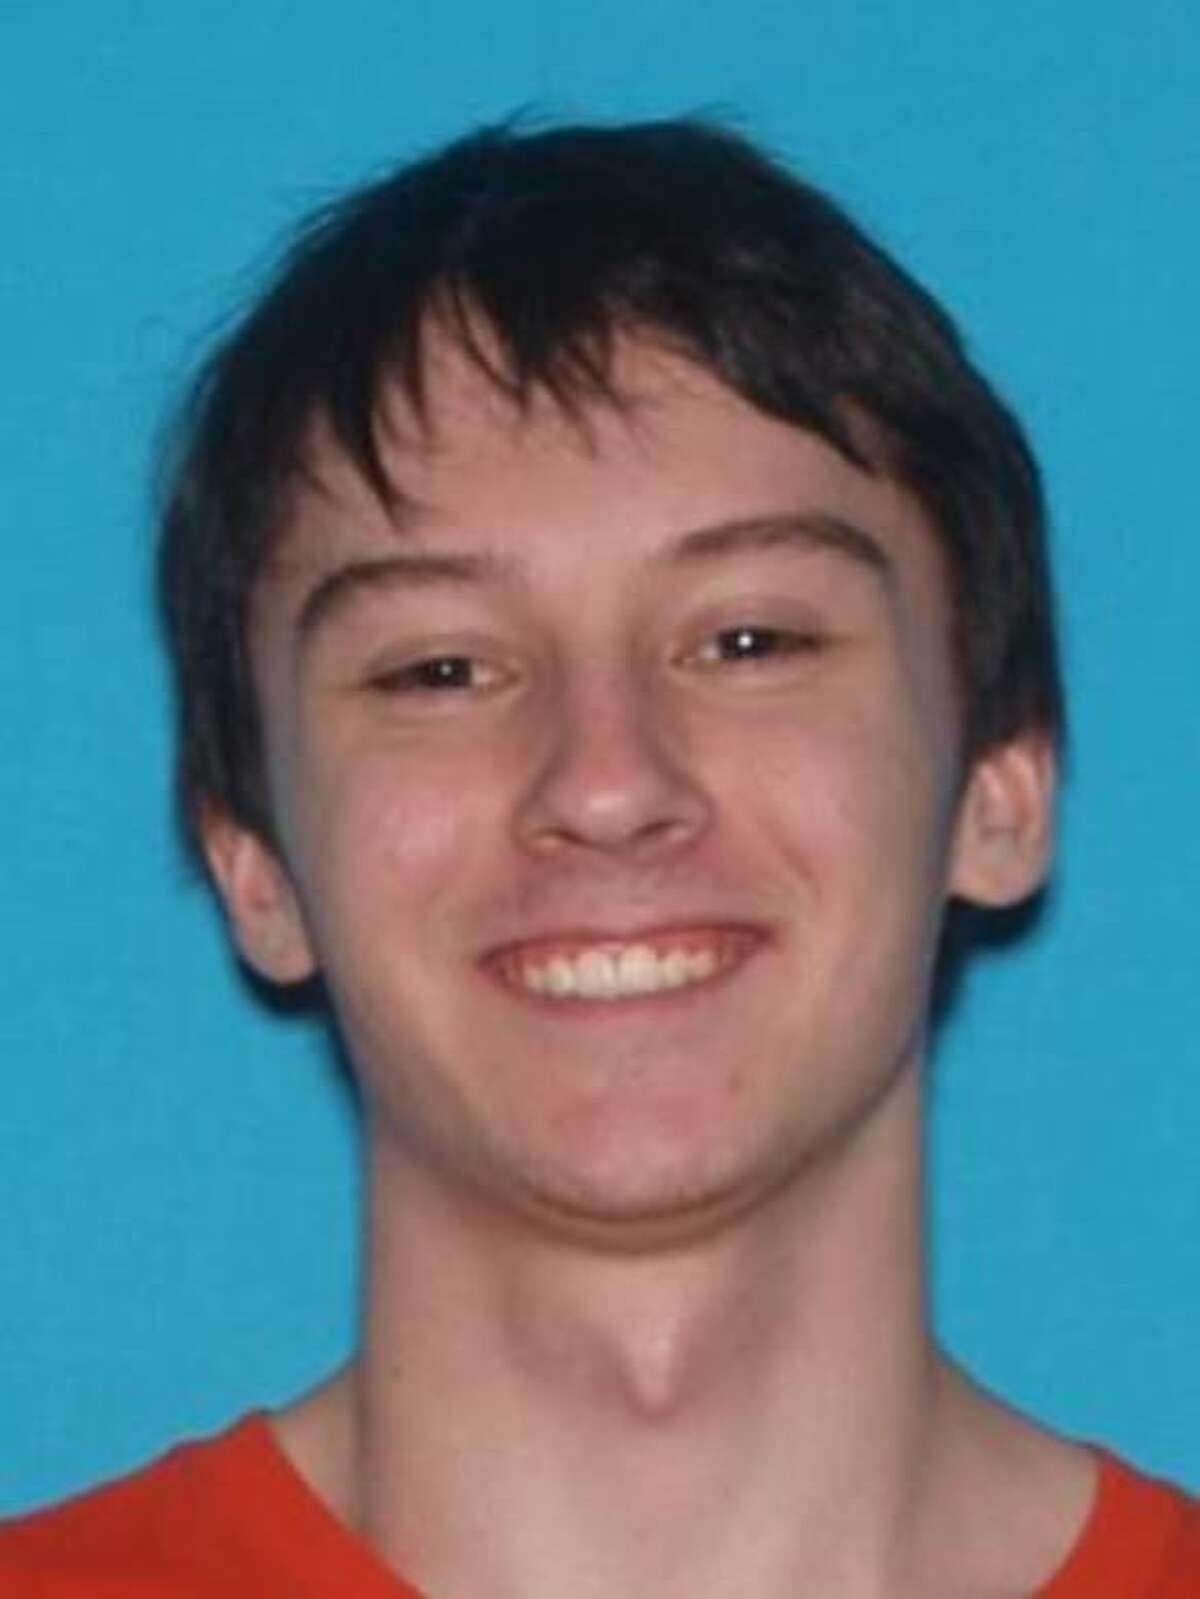 William Michael Bryars, 17, is wanted on felony charges of aggravated assault with a deadly weapon and unauthorized use of a vehicle, a news release said Wednesday.